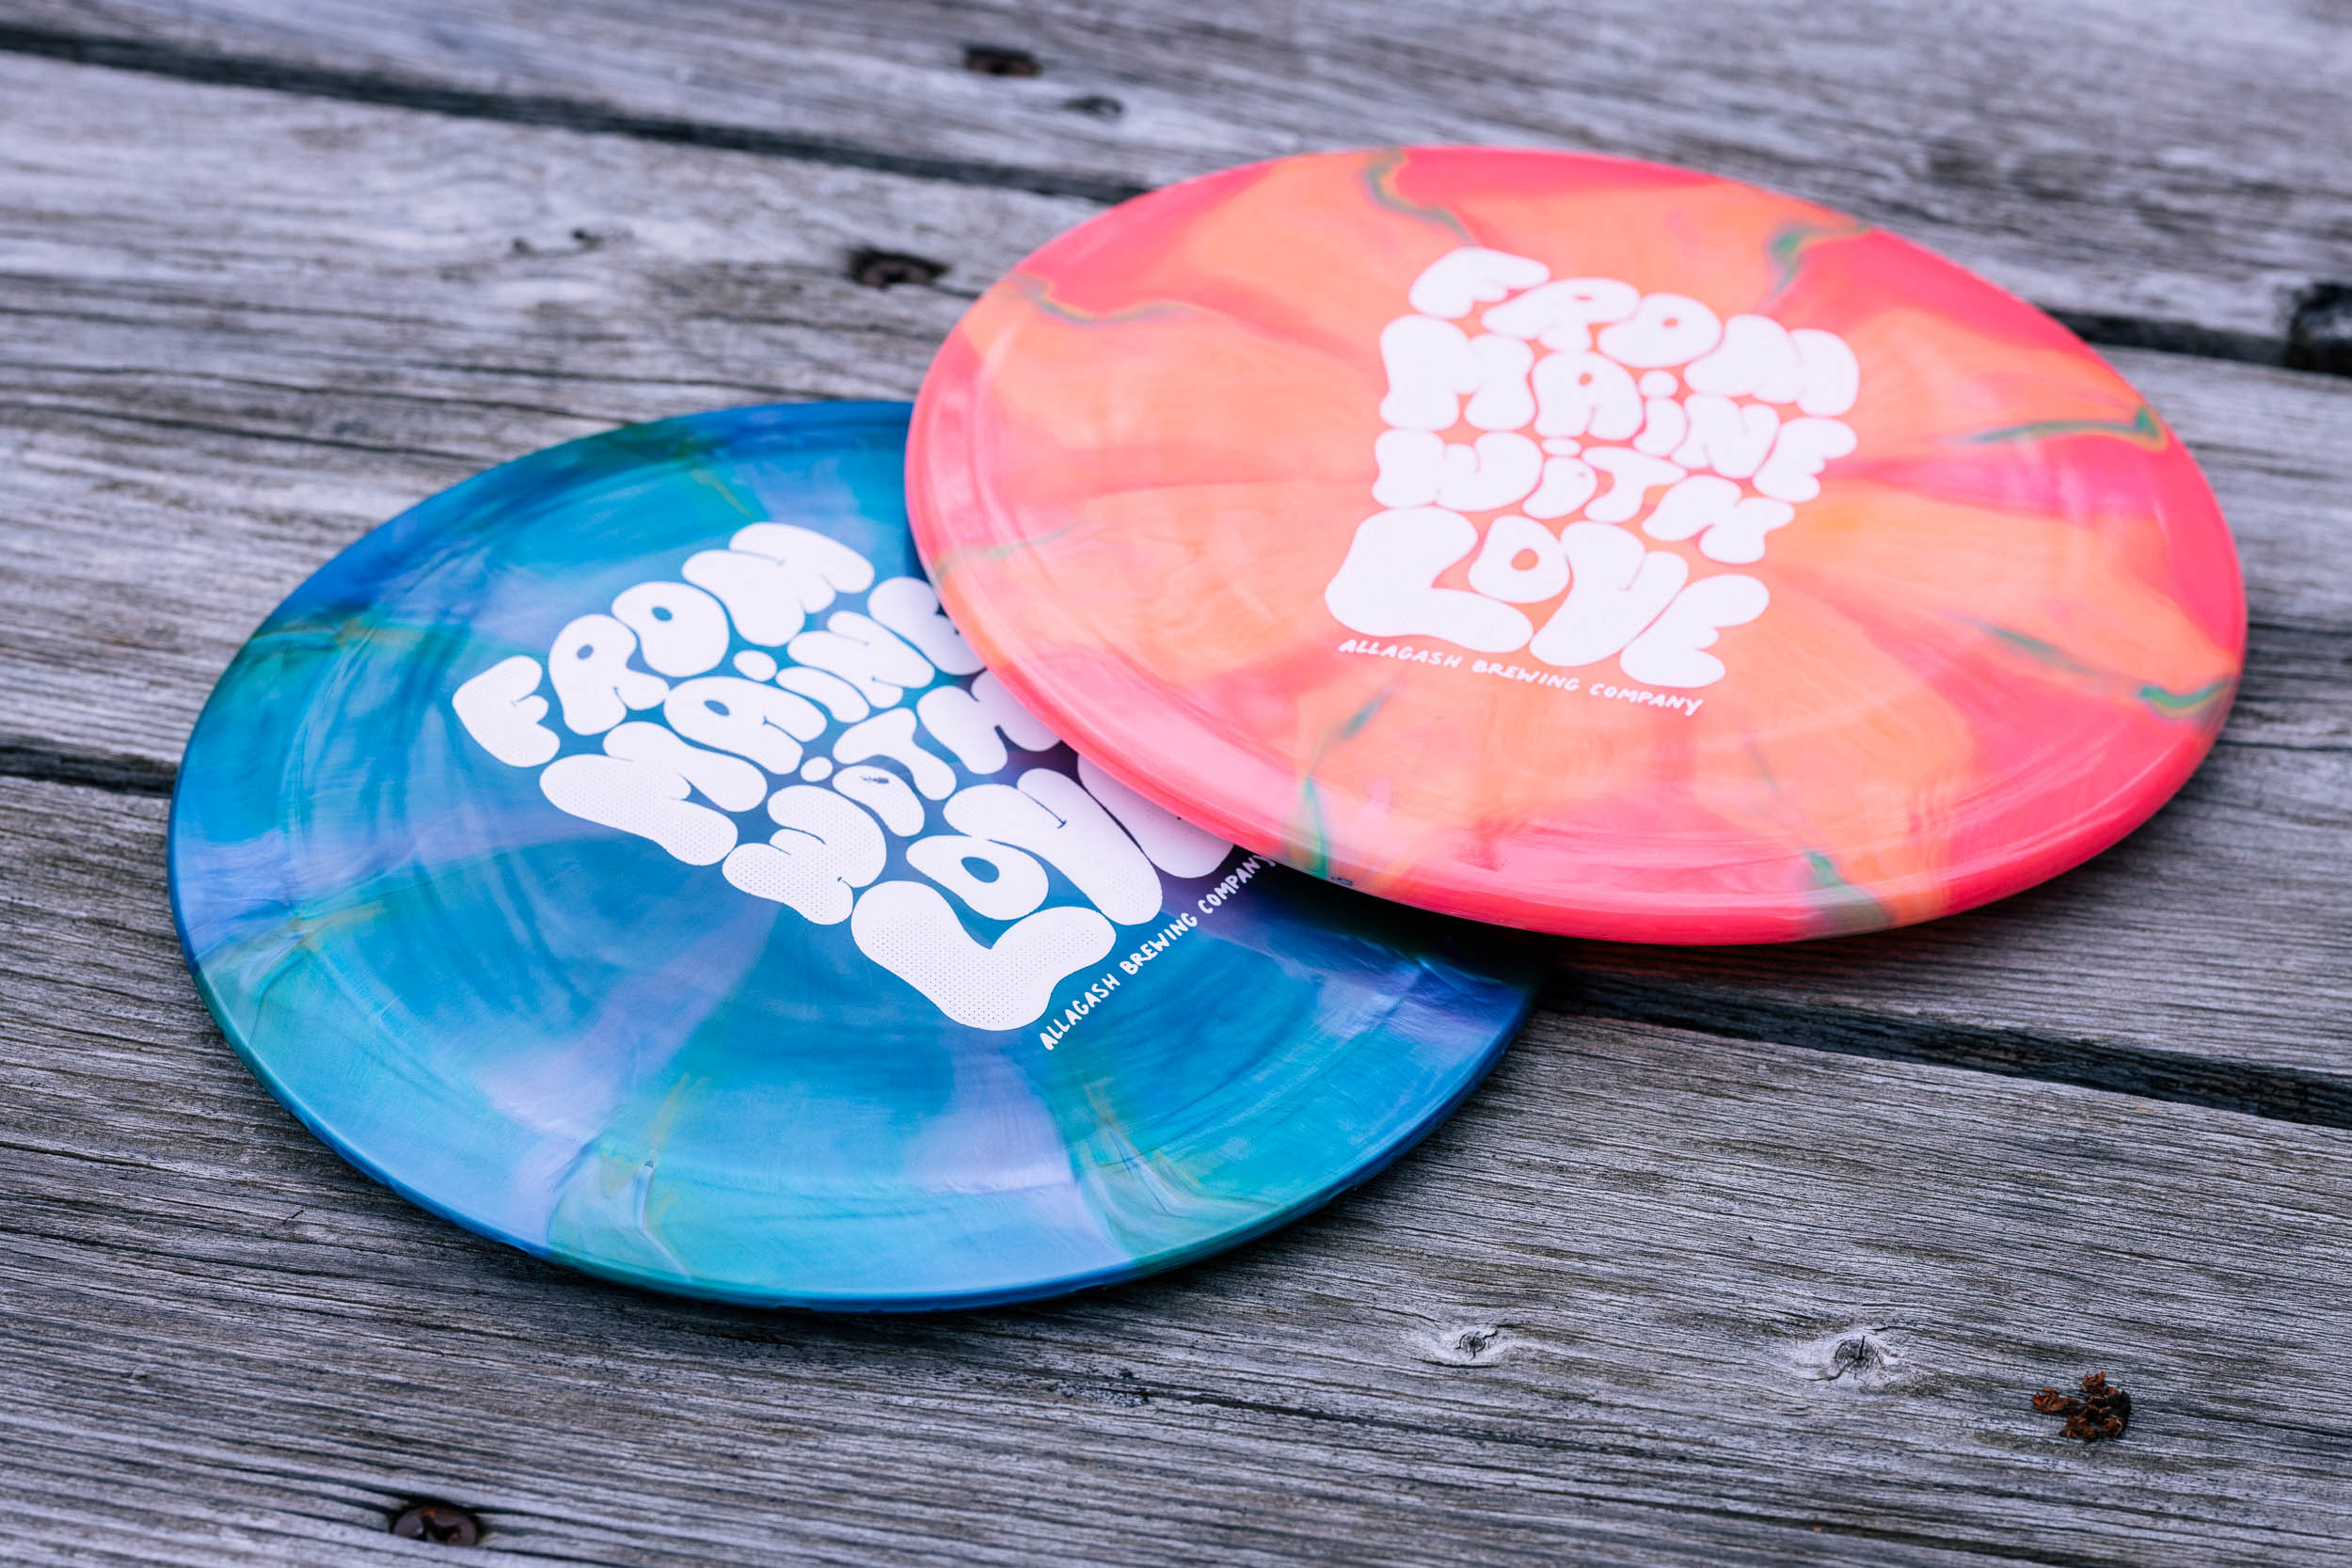 Allagash disc golf discs on a wooden table, lookin' all nice.